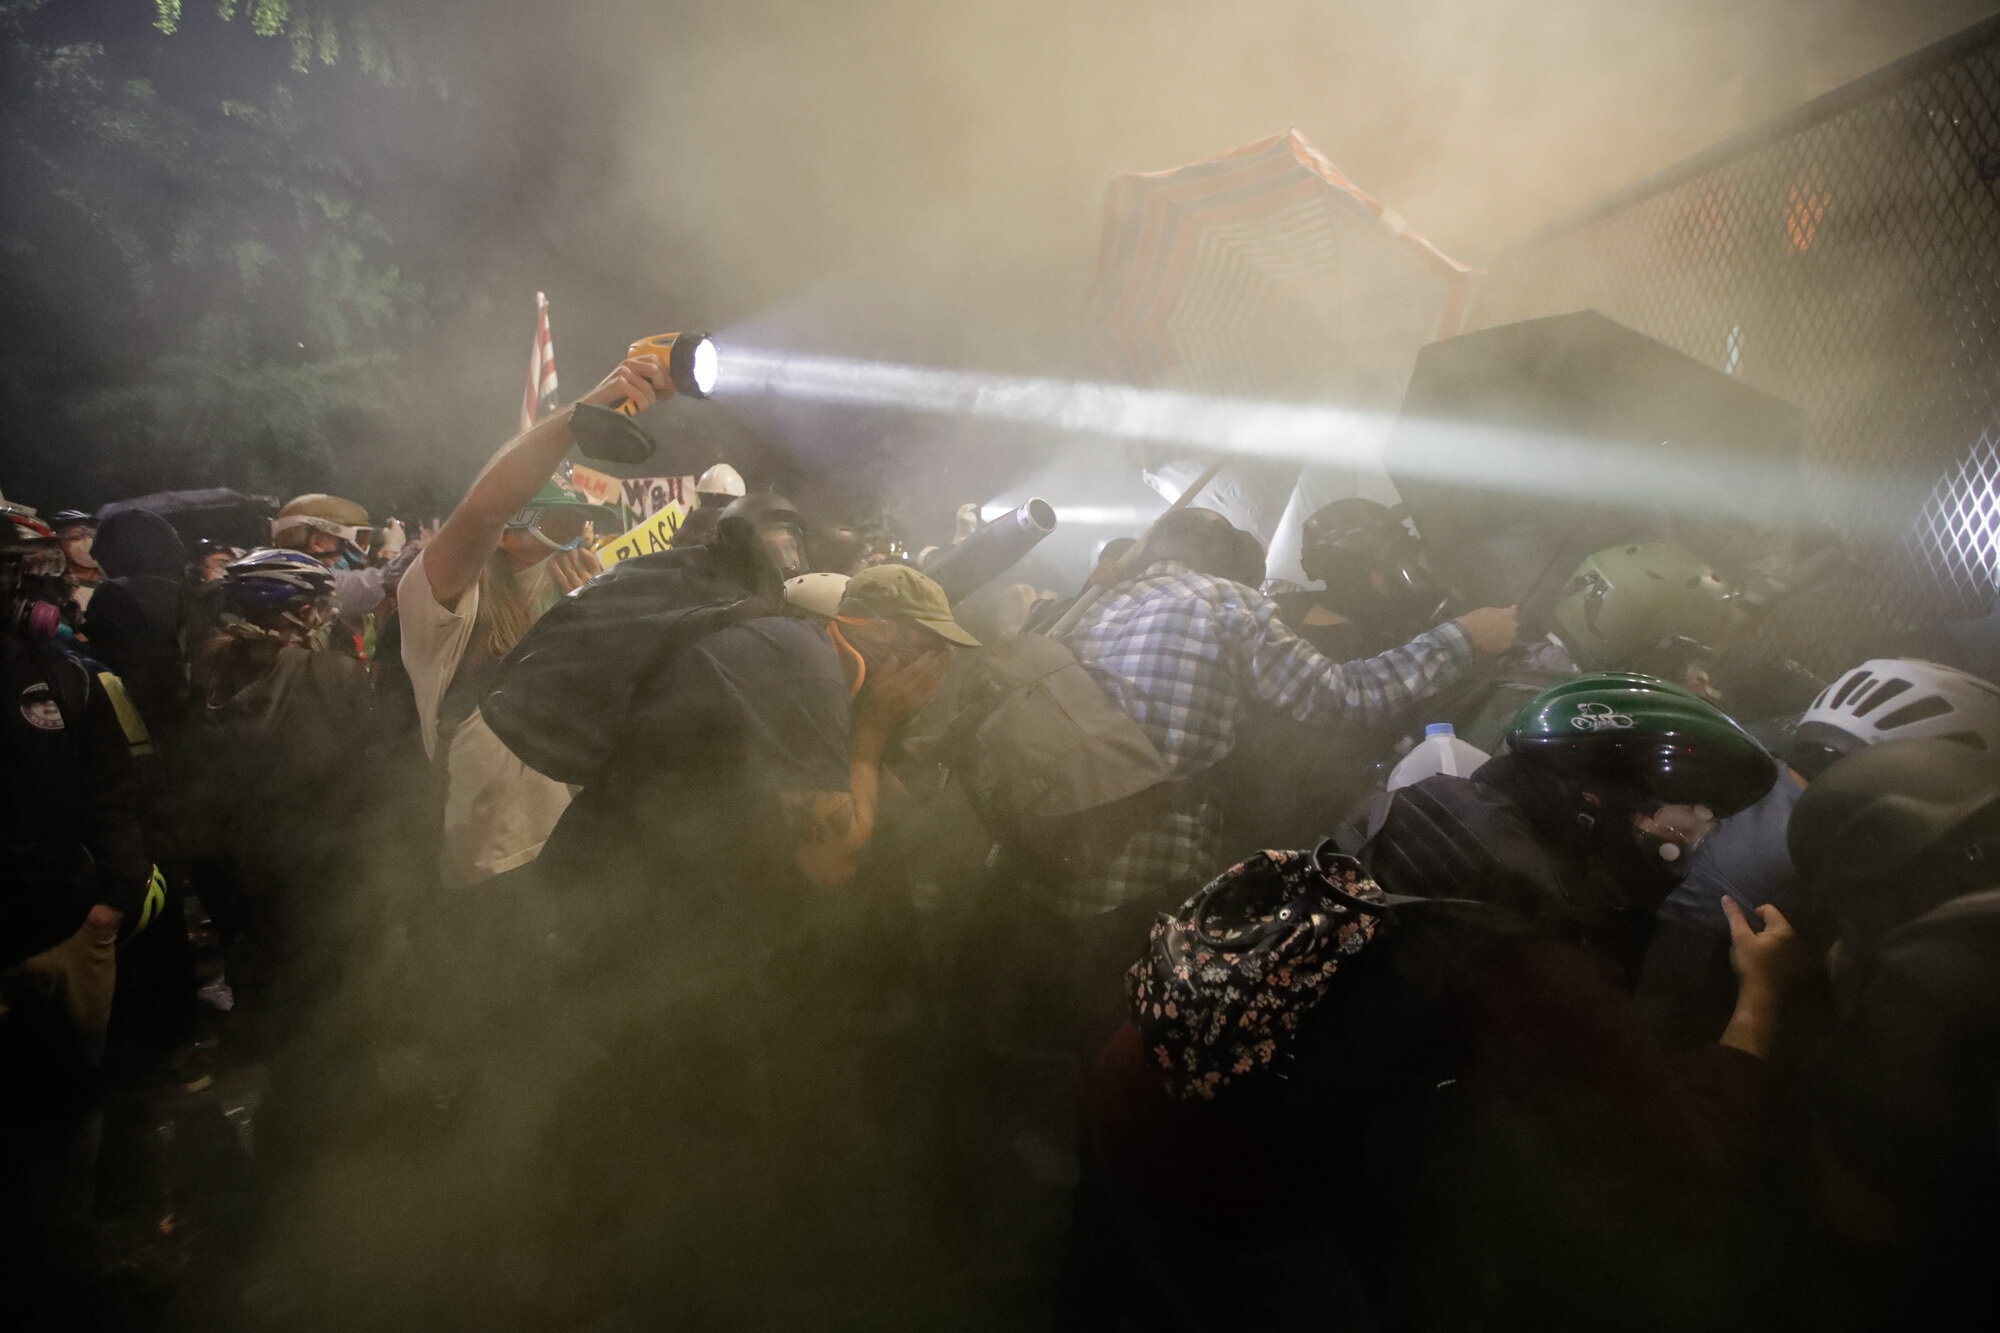  Demonstrators push on a fence as tear gas is deployed during a Black Lives Matter protest at the Mark O. Hatfield United States Courthouse in Portland, Ore., on July 25, 2020. (AP Photo/Marcio Jose Sanchez) 